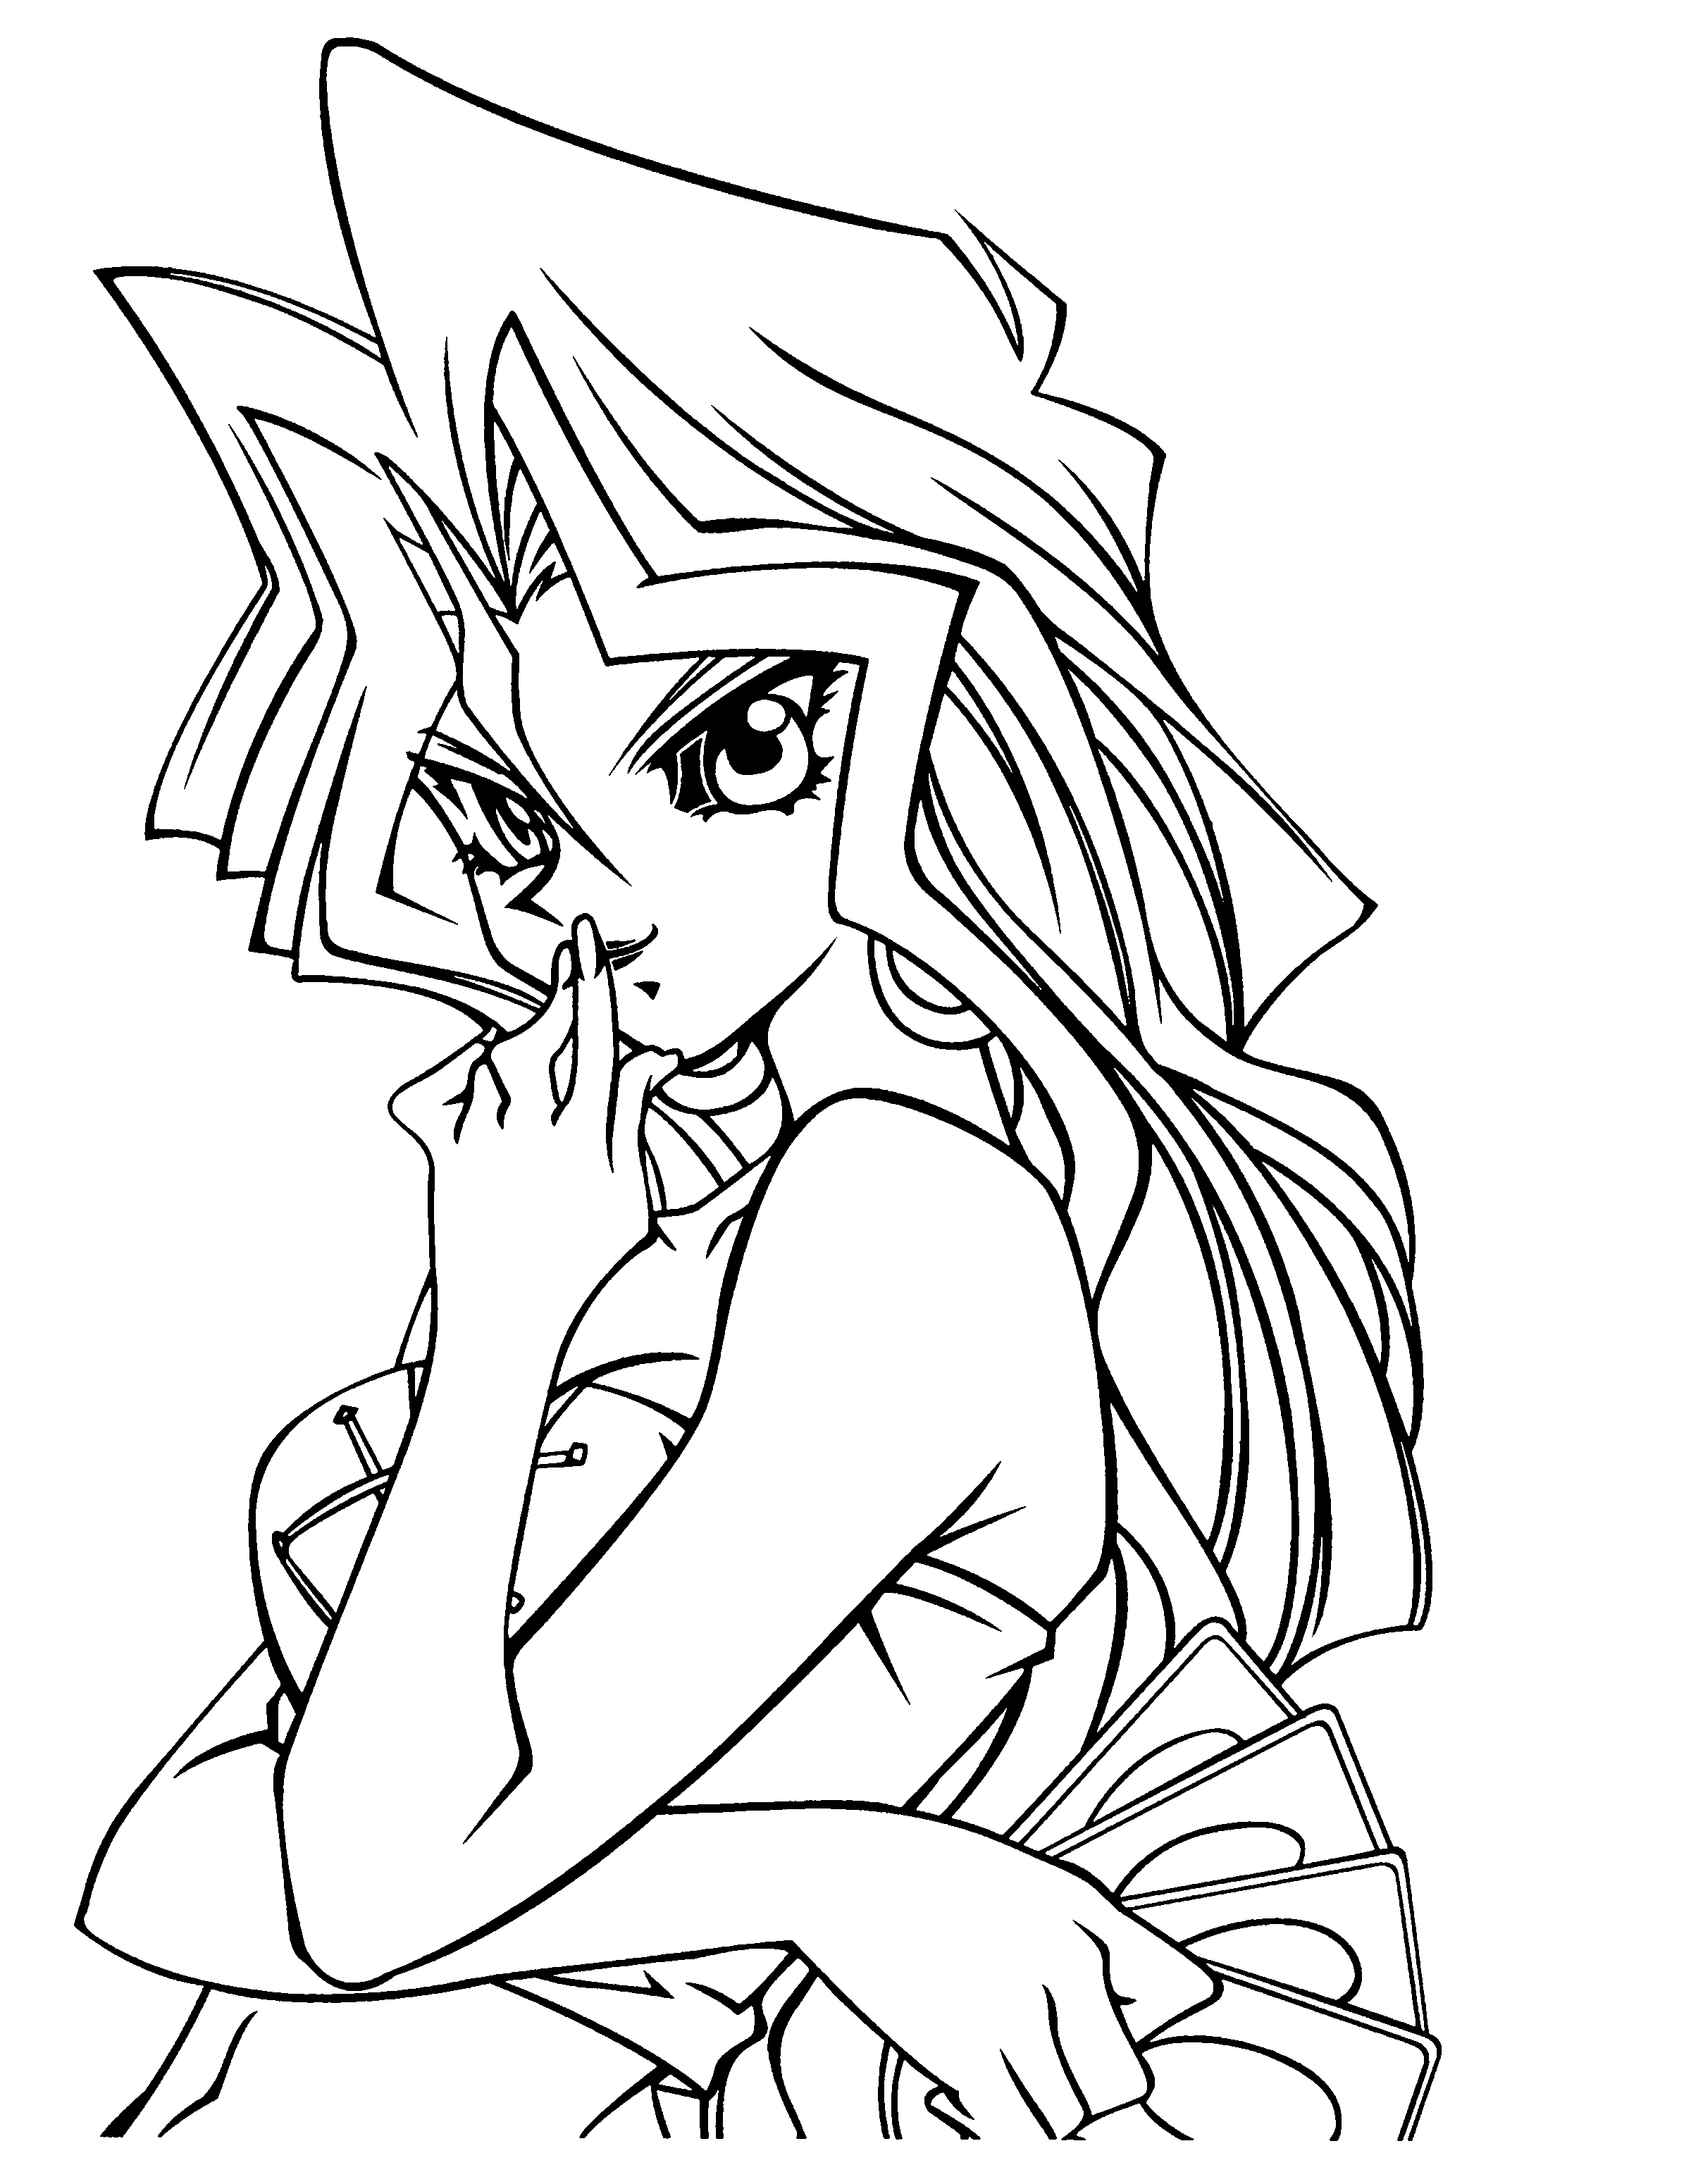 Yugioh coloring pages mai educative printable coloring pages coloring pictures for kids yugioh